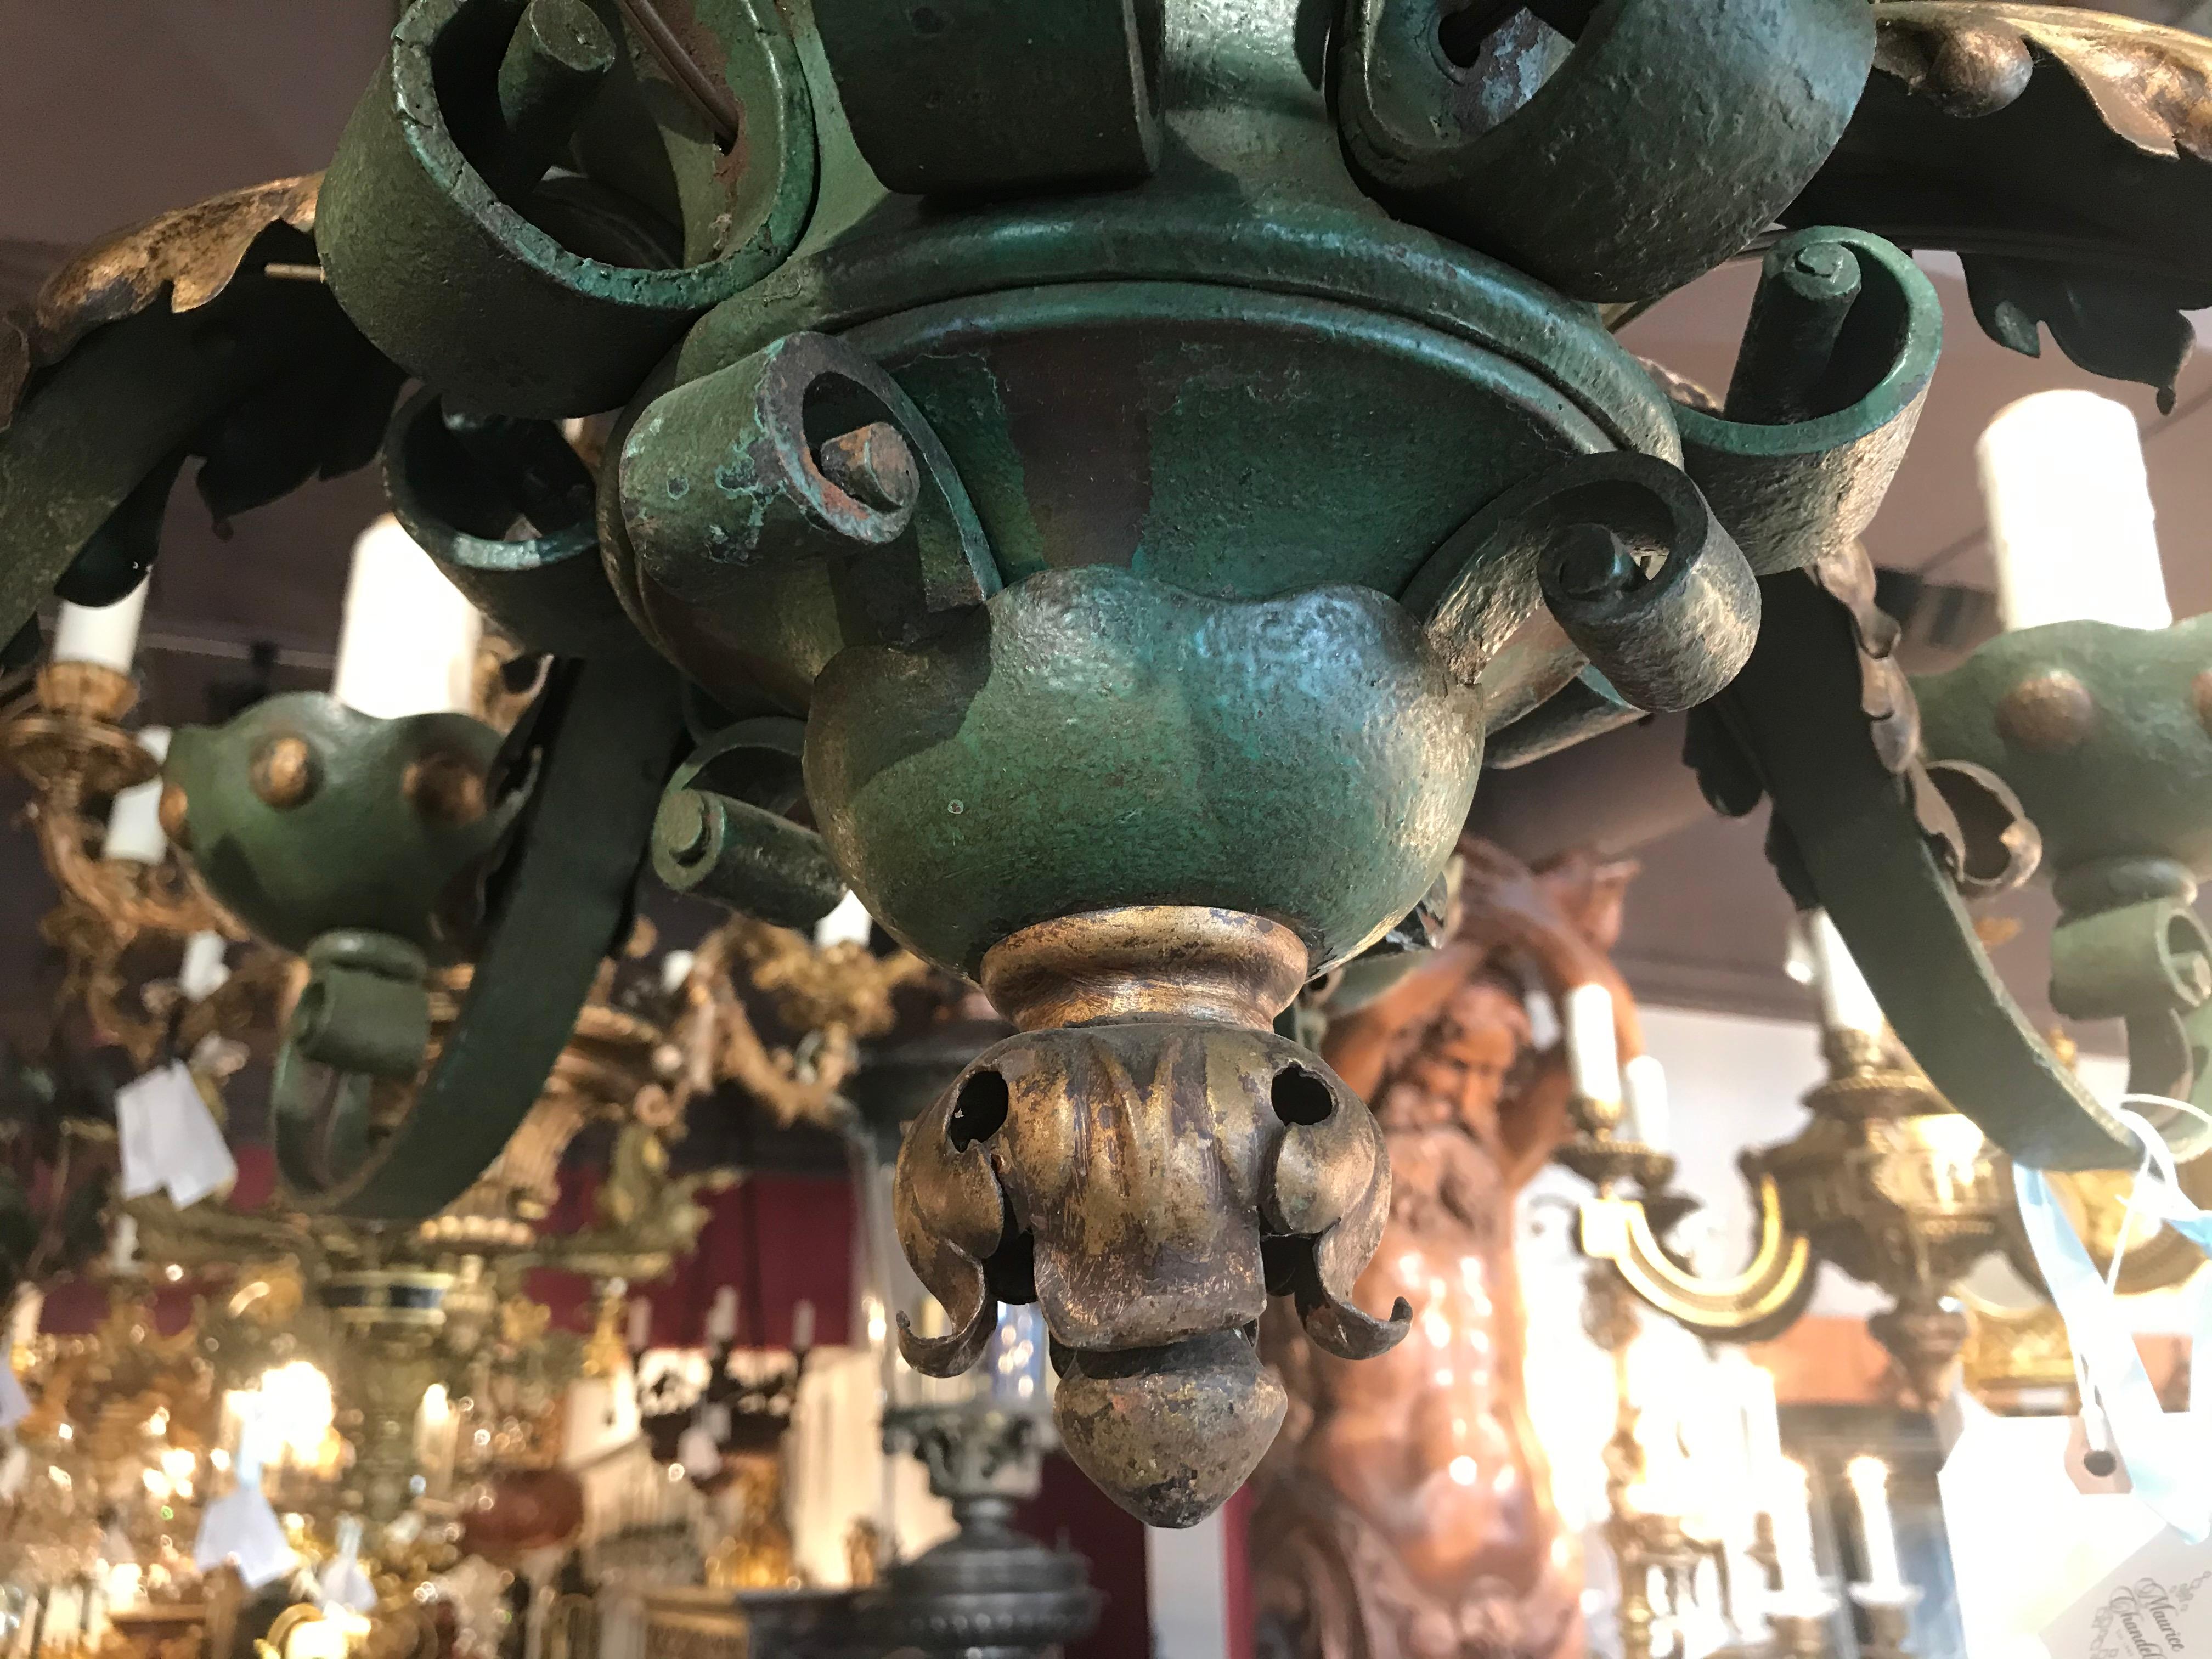 Iron Chandelier For Sale 2